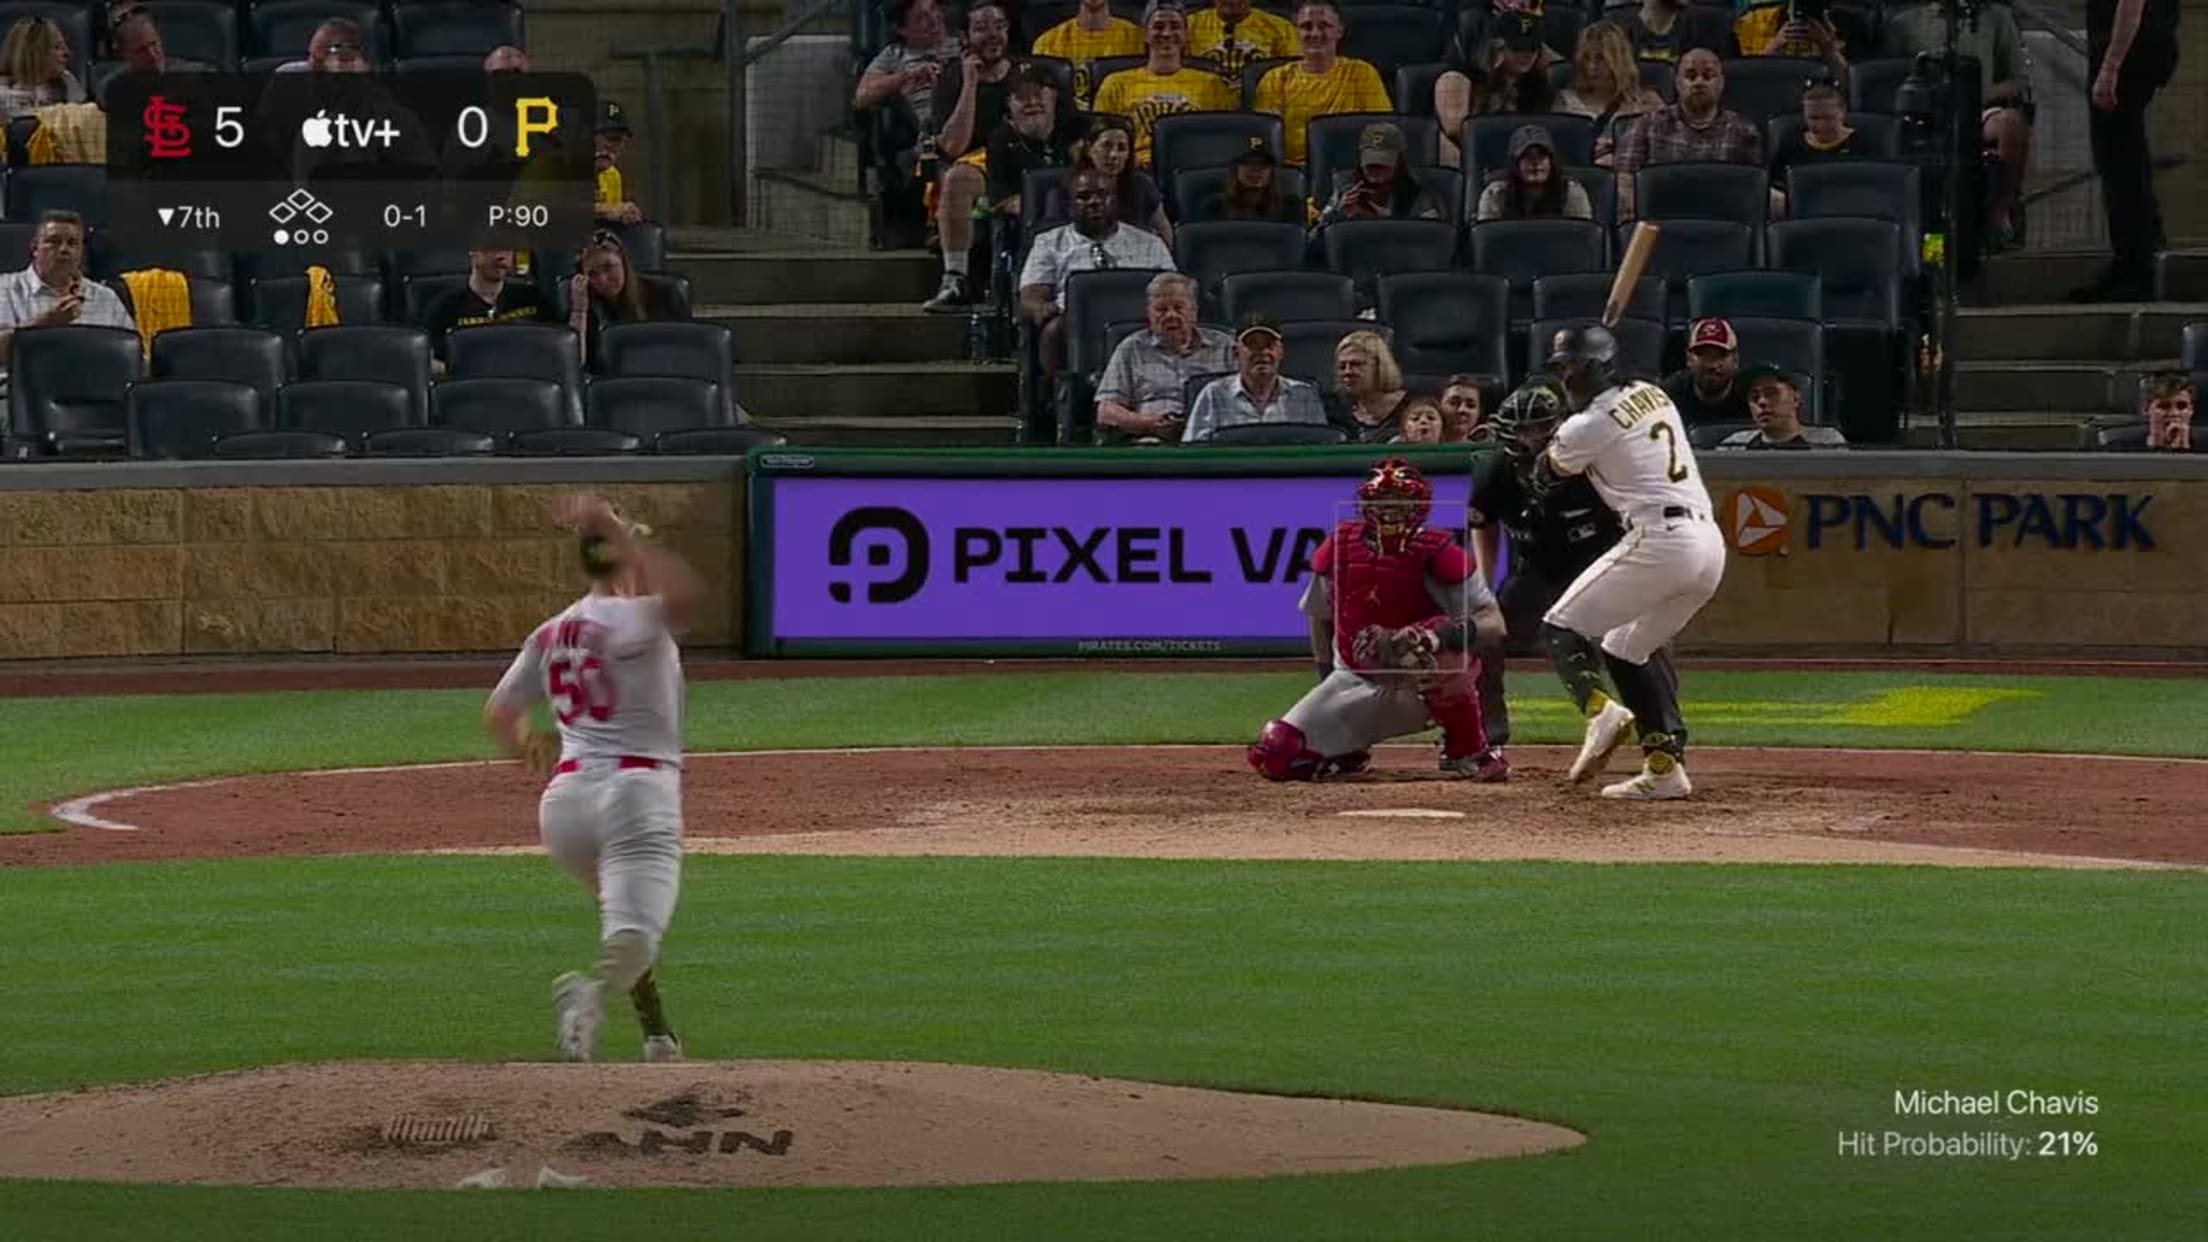 Michael Chavis hits 1st home run for Pirates after focusing on